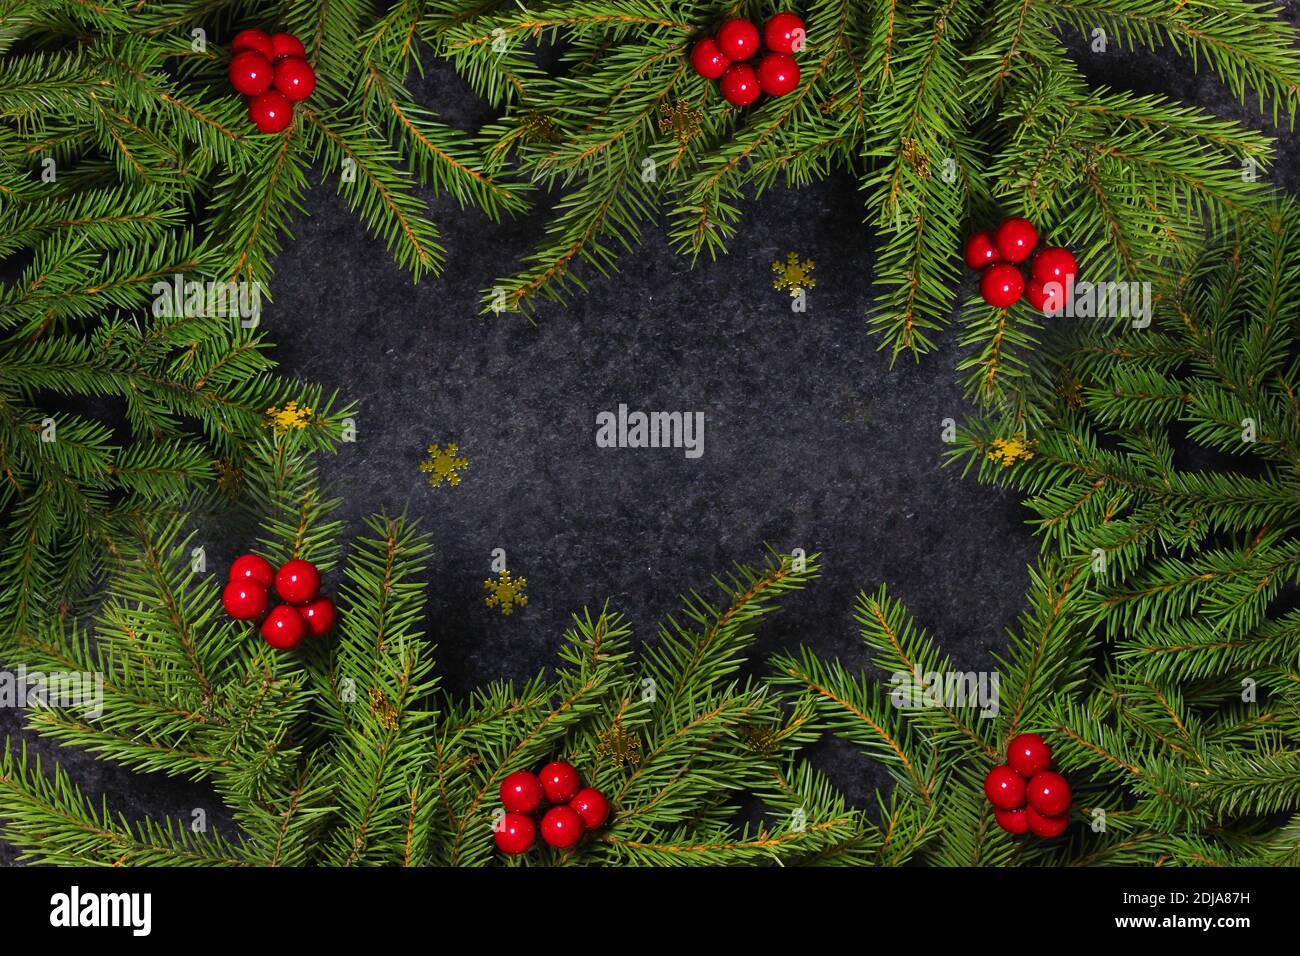 Christmas holiday background with copy space for text. Flat lay, top view. Decorative frame of fir branches and holly berries Stock Photo